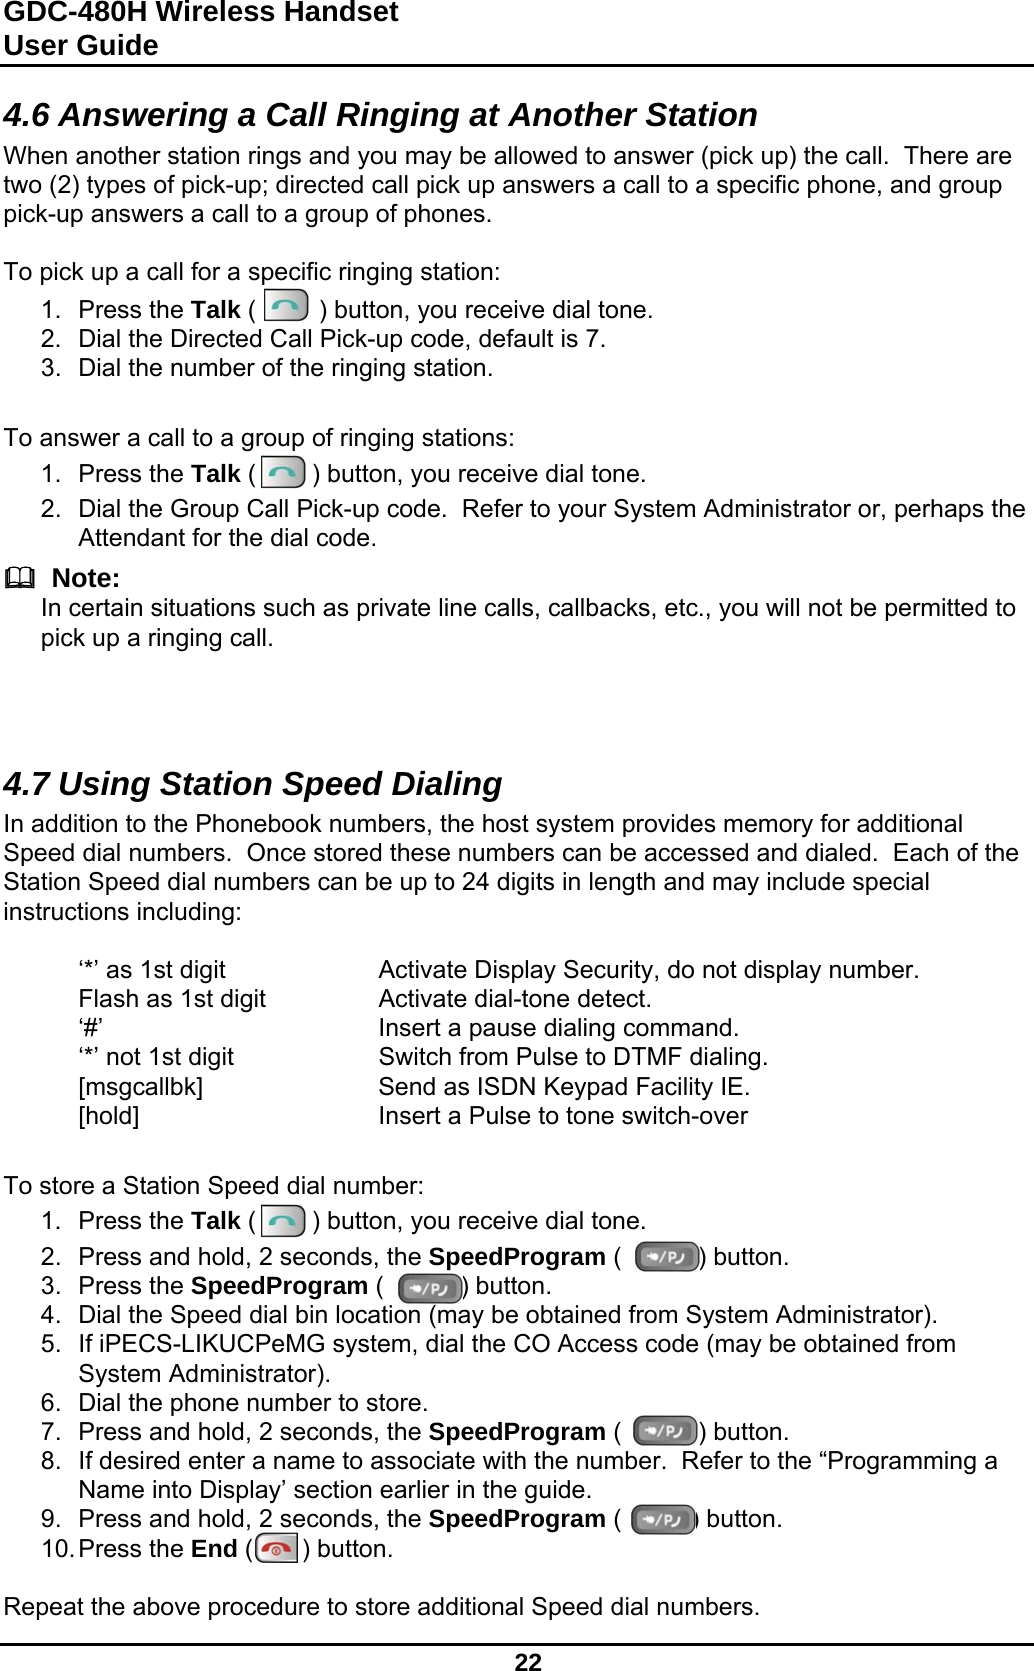 GDC-480H Wireless Handset User Guide   22  4.6 Answering a Call Ringing at Another Station When another station rings and you may be allowed to answer (pick up) the call.  There are two (2) types of pick-up; directed call pick up answers a call to a specific phone, and group pick-up answers a call to a group of phones.  To pick up a call for a specific ringing station: 1. Press the Talk (         ) button, you receive dial tone. 2.  Dial the Directed Call Pick-up code, default is 7. 3.  Dial the number of the ringing station.   To answer a call to a group of ringing stations: 1. Press the Talk (        ) button, you receive dial tone. 2.  Dial the Group Call Pick-up code.  Refer to your System Administrator or, perhaps the Attendant for the dial code.    Note: In certain situations such as private line calls, callbacks, etc., you will not be permitted to pick up a ringing call.    4.7 Using Station Speed Dialing In addition to the Phonebook numbers, the host system provides memory for additional Speed dial numbers.  Once stored these numbers can be accessed and dialed.  Each of the Station Speed dial numbers can be up to 24 digits in length and may include special instructions including:    ‘*’ as 1st digit     Activate Display Security, do not display number.   Flash as 1st digit    Activate dial-tone detect.  ‘#’    Insert a pause dialing command.   ‘*’ not 1st digit    Switch from Pulse to DTMF dialing.   [msgcallbk]      Send as ISDN Keypad Facility IE.  [hold]    Insert a Pulse to tone switch-over   To store a Station Speed dial number: 1. Press the Talk (        ) button, you receive dial tone. 2.  Press and hold, 2 seconds, the SpeedProgram (           ) button. 3. Press the SpeedProgram (           ) button. 4.  Dial the Speed dial bin location (may be obtained from System Administrator). 5.  If iPECS-LIKUCPeMG system, dial the CO Access code (may be obtained from System Administrator). 6.  Dial the phone number to store. 7.  Press and hold, 2 seconds, the SpeedProgram (           ) button. 8.  If desired enter a name to associate with the number.  Refer to the “Programming a Name into Display’ section earlier in the guide. 9.  Press and hold, 2 seconds, the SpeedProgram (          ) button. 10. Press  the  End (       ) button.  Repeat the above procedure to store additional Speed dial numbers. 